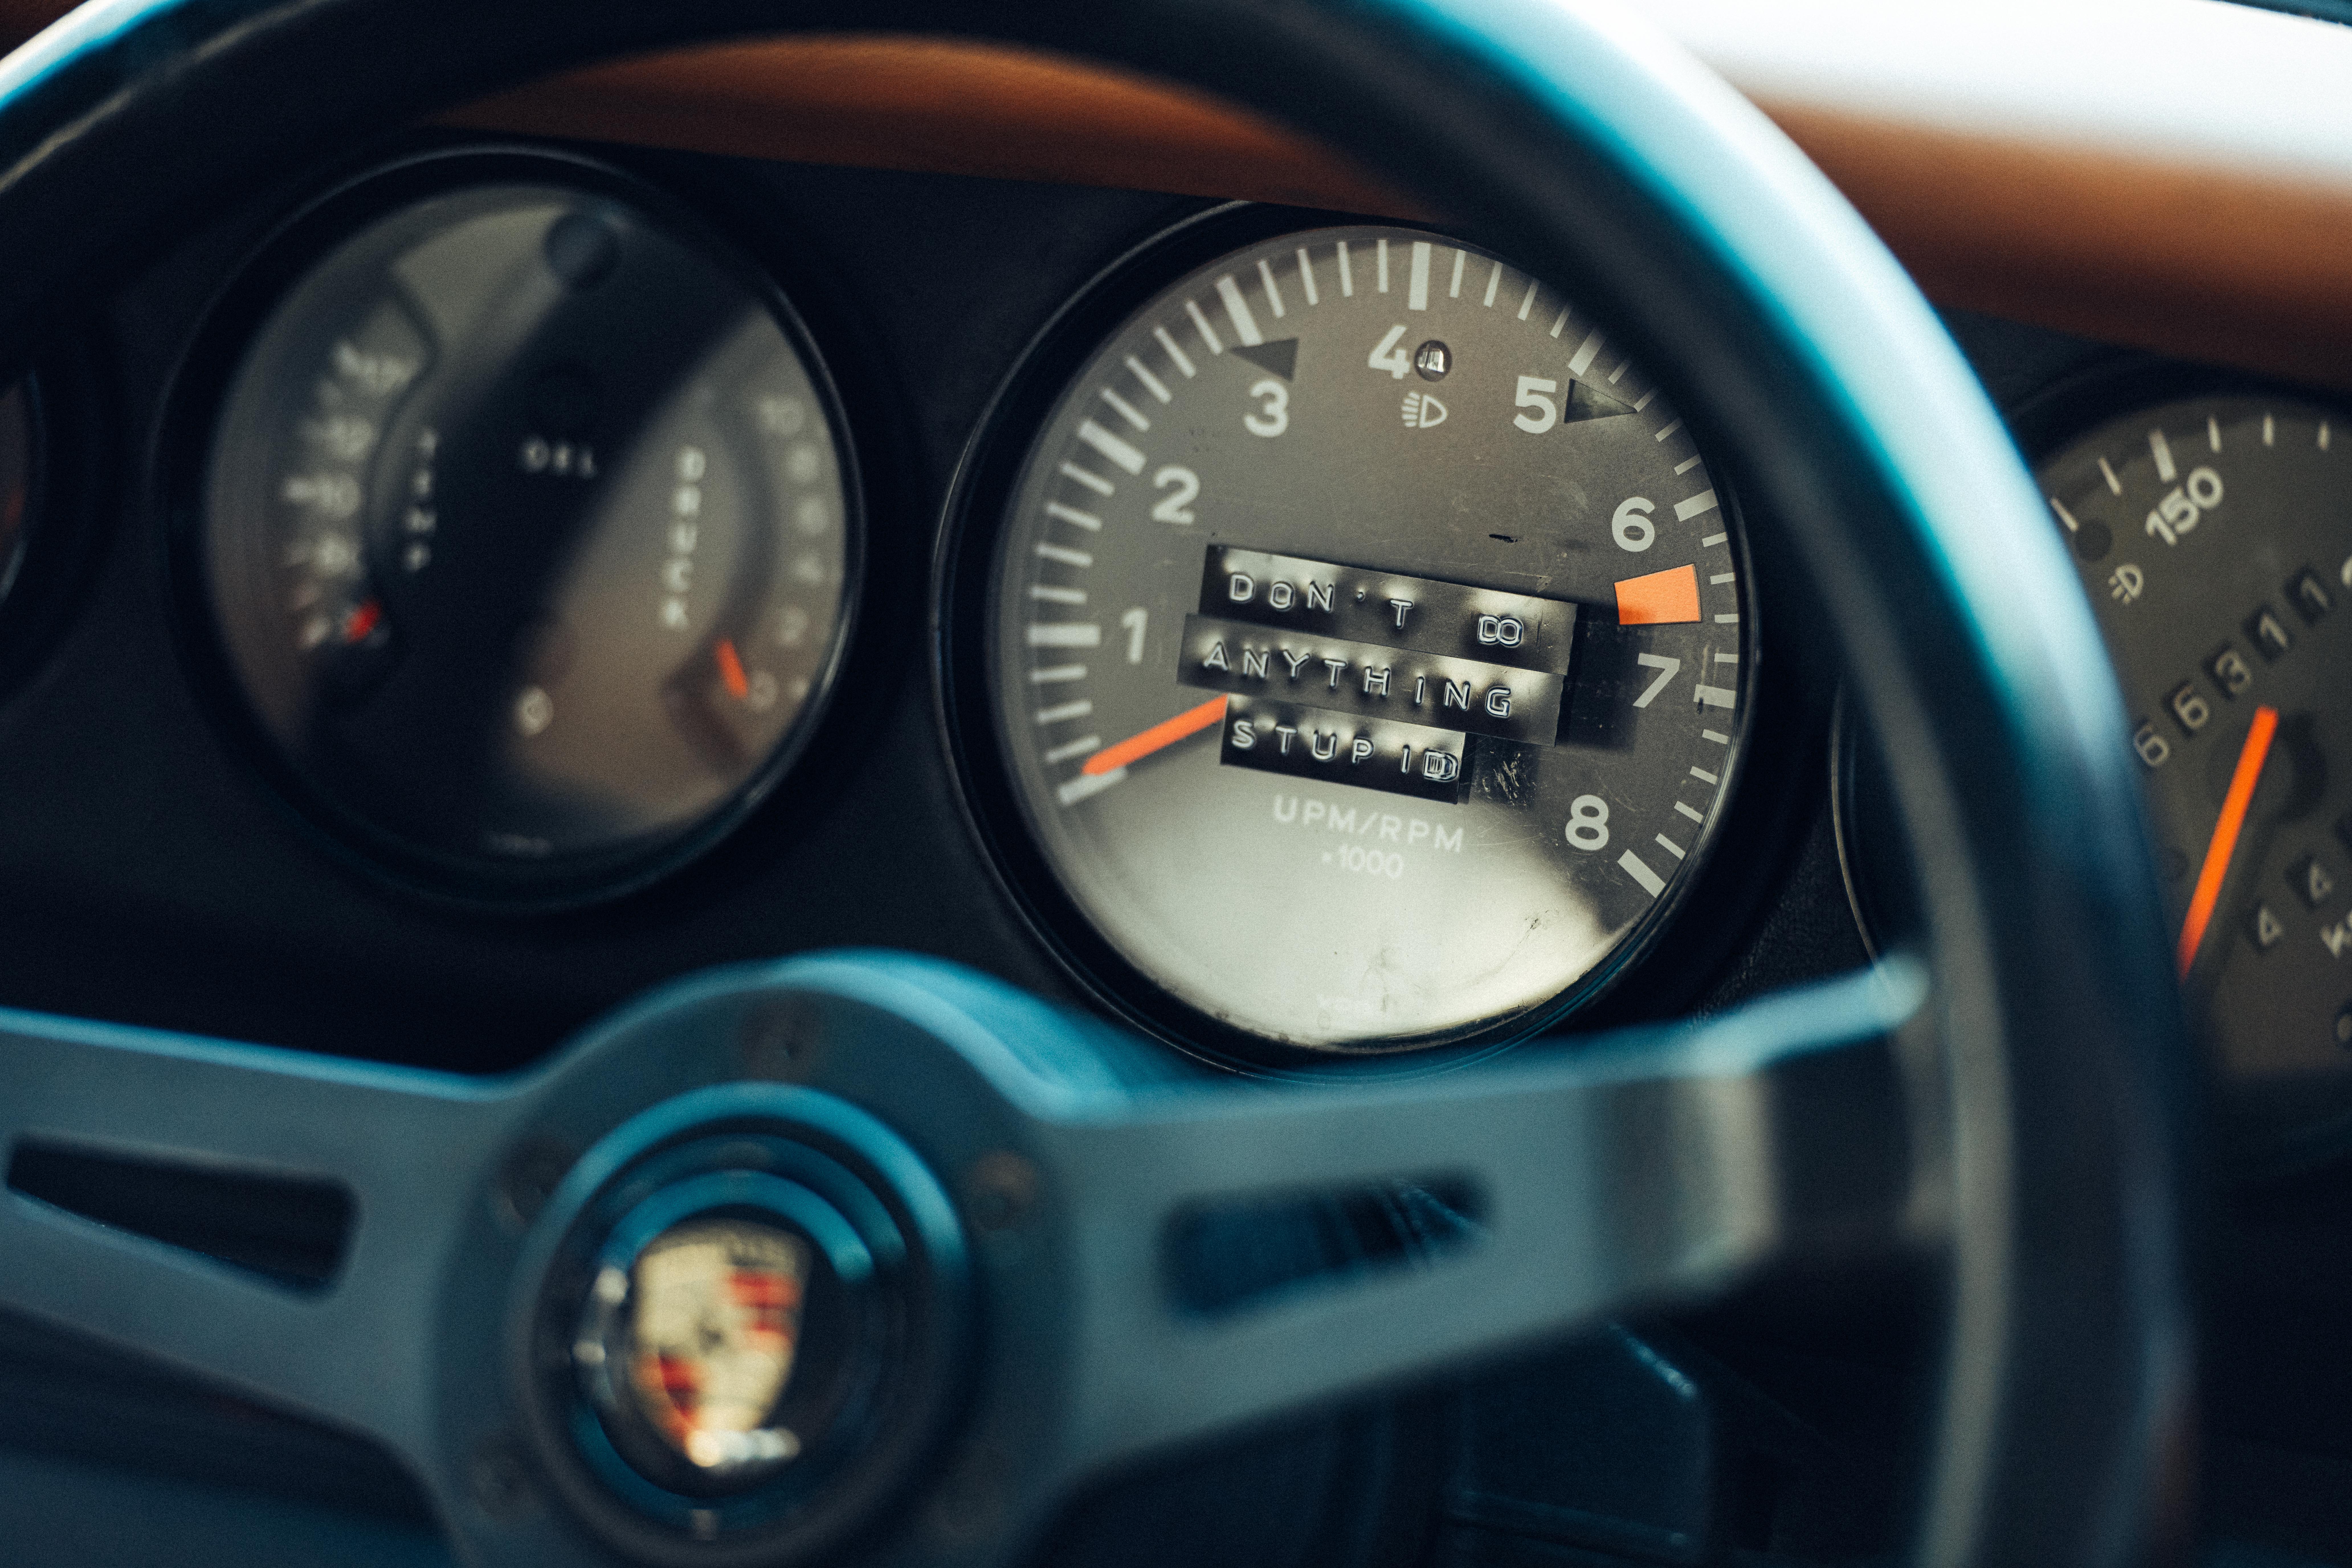 The words, ‘Don’t do anything stupid’ on car tachometer